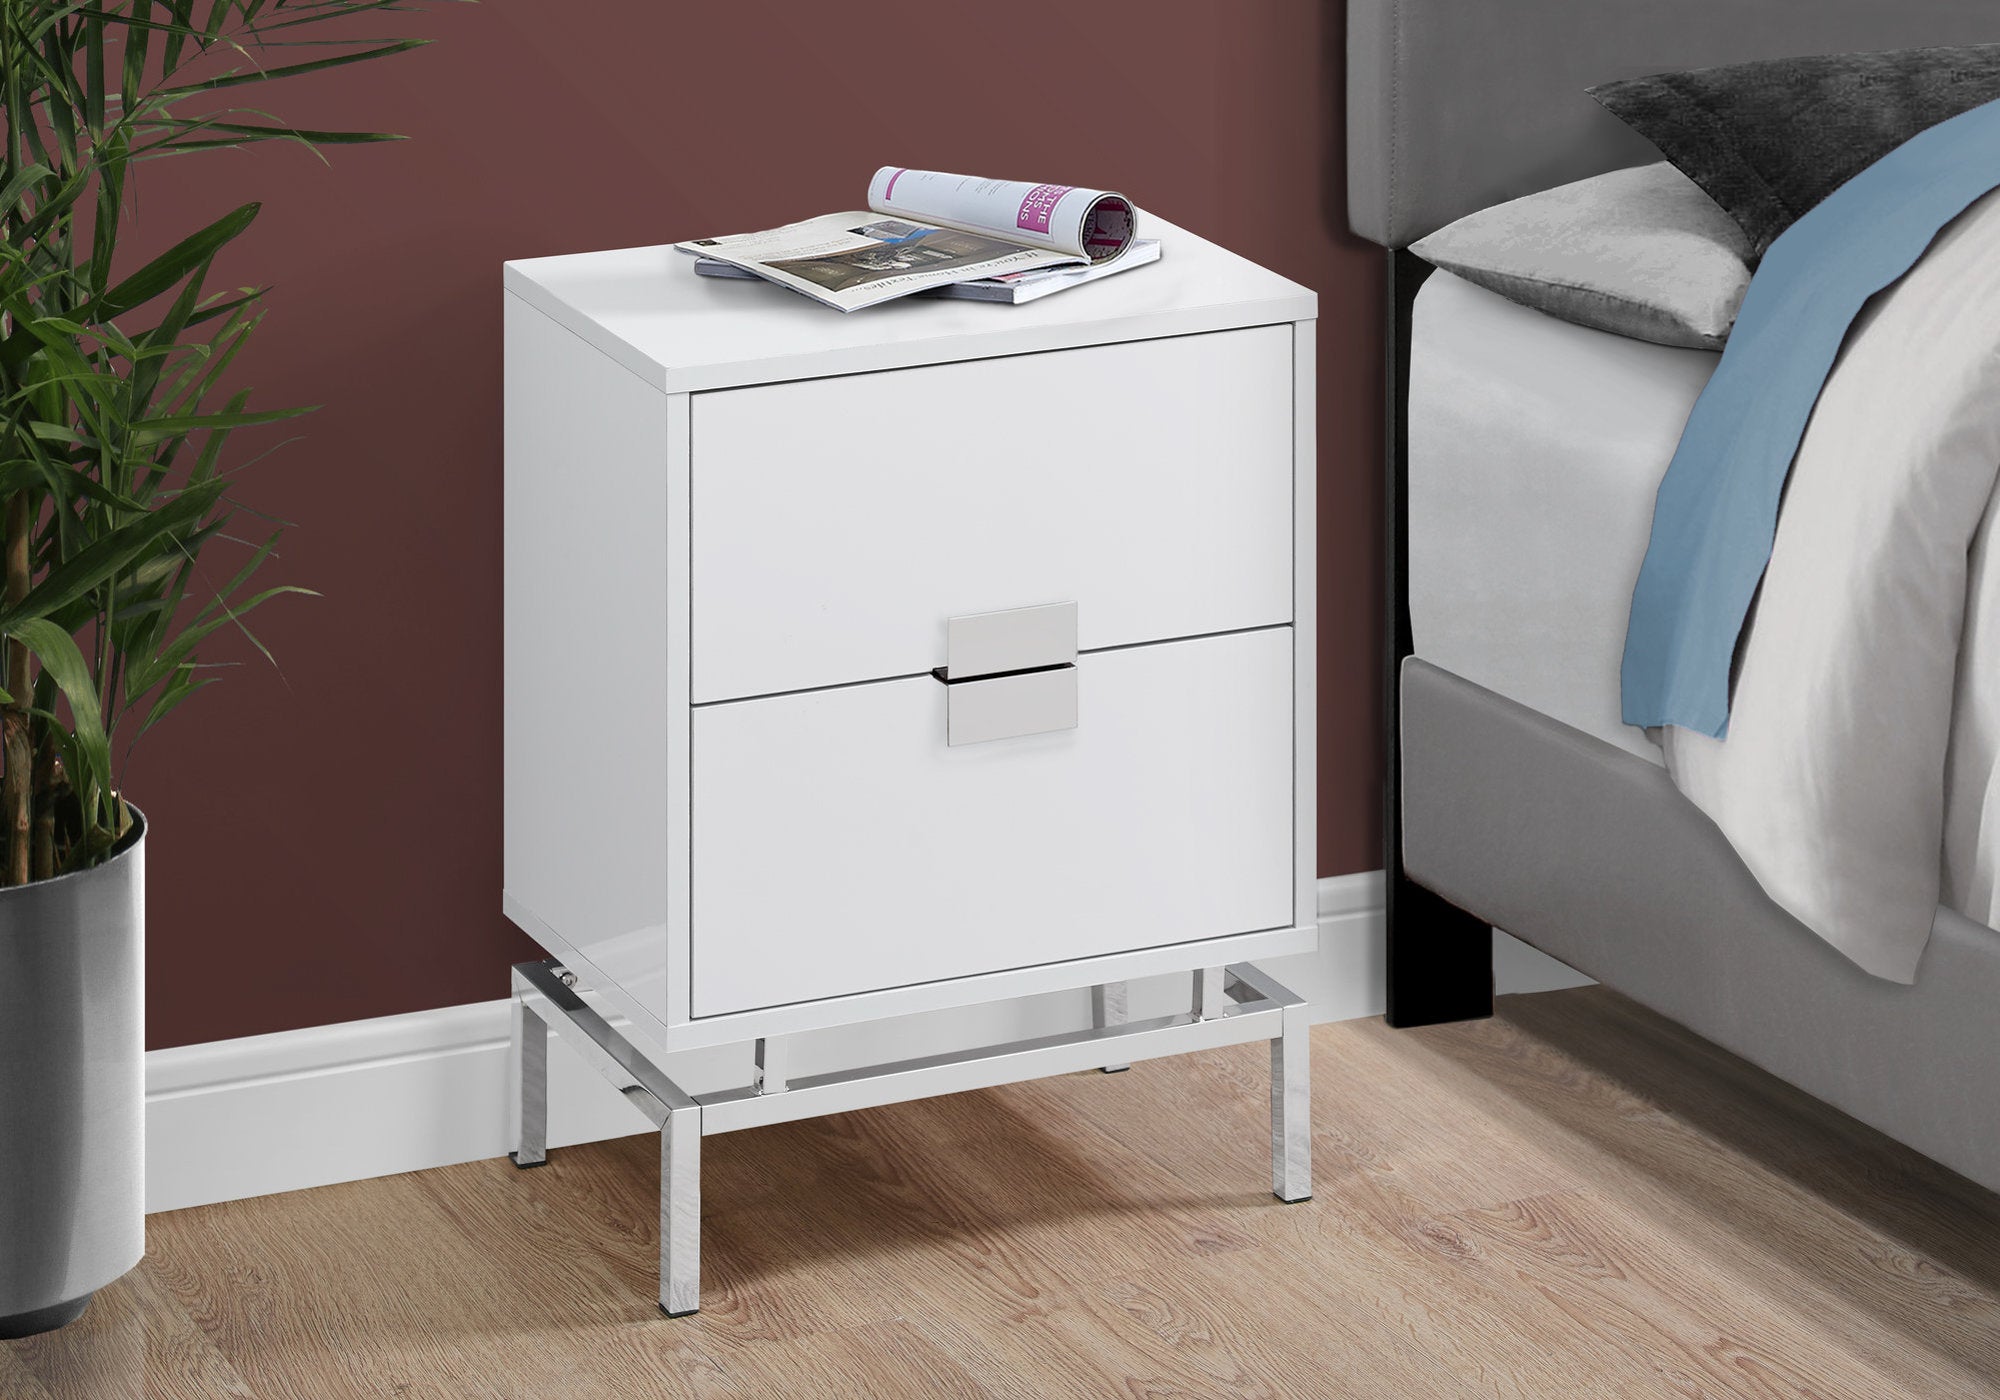 MN-933490    Accent Table, Side, End, Nightstand, Lamp, Living Room, Bedroom, Metal Legs, Laminate, Glossy White, Chrome, Contemporary, Modern